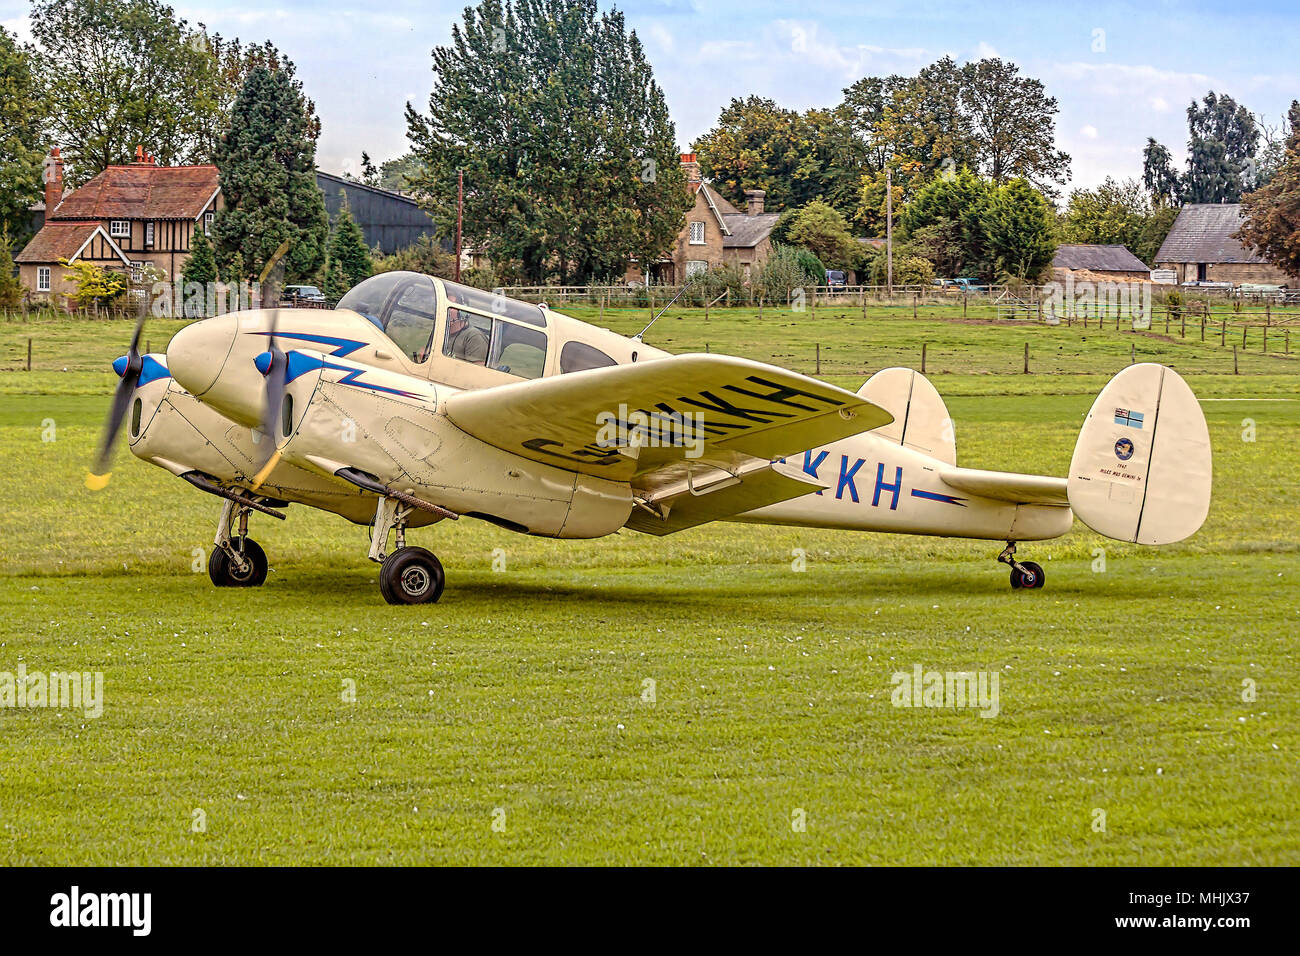 Sir John Allison taxies his 1947 Miles Gemini 1A G-AKKH in at Old Warden,UK, while visiting in 2011. Canon EOS 50D. Stock Photo